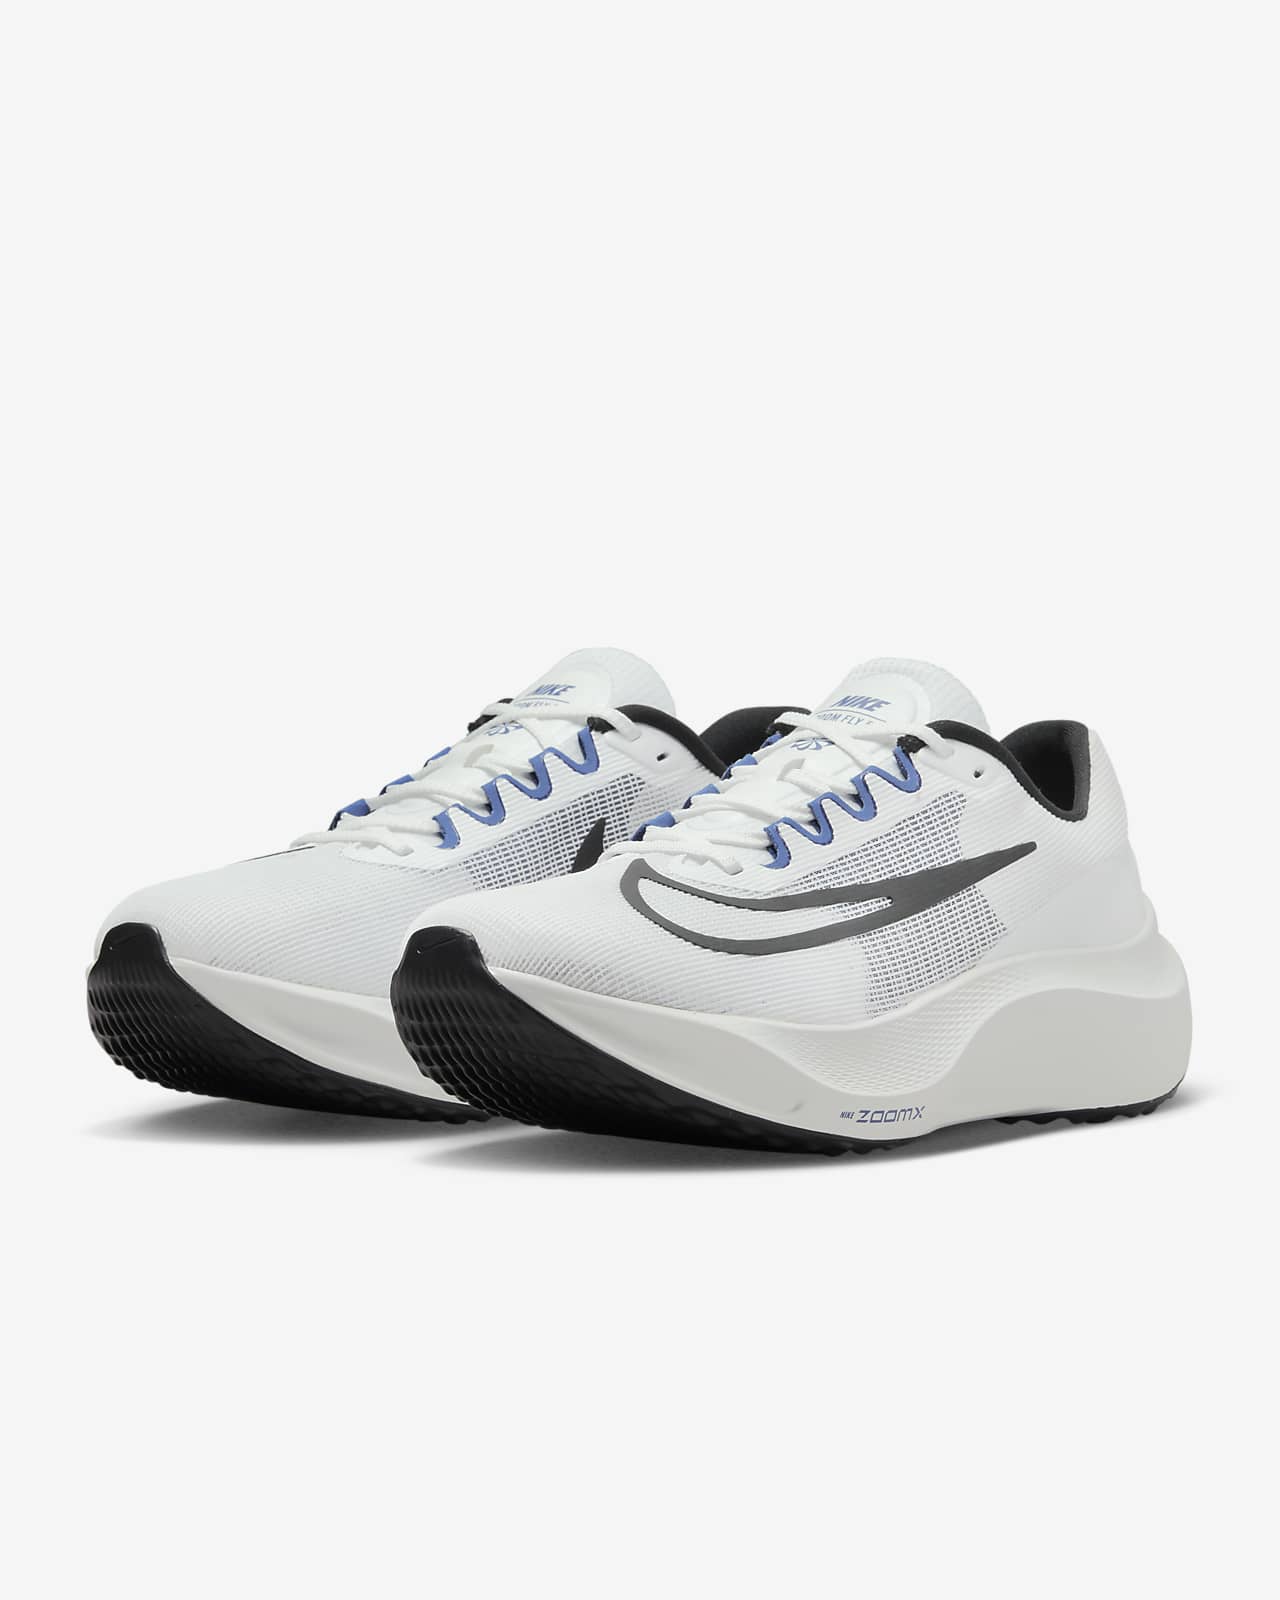 Nike Zoom Fly 5 Men's Running Shoes